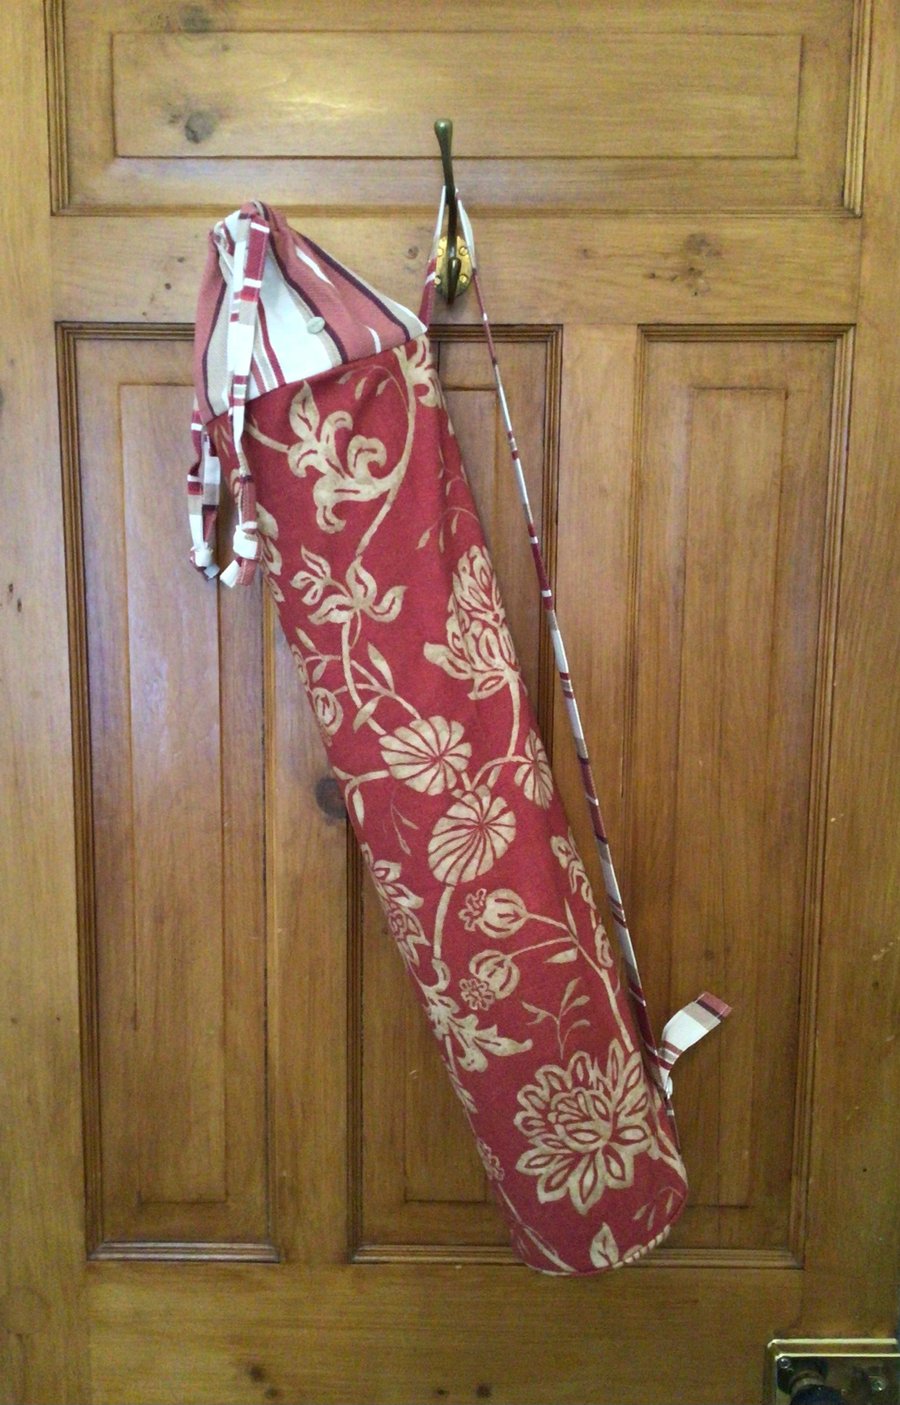 Yoga Mat Bag in Russet Floral and Striped Print Fabric